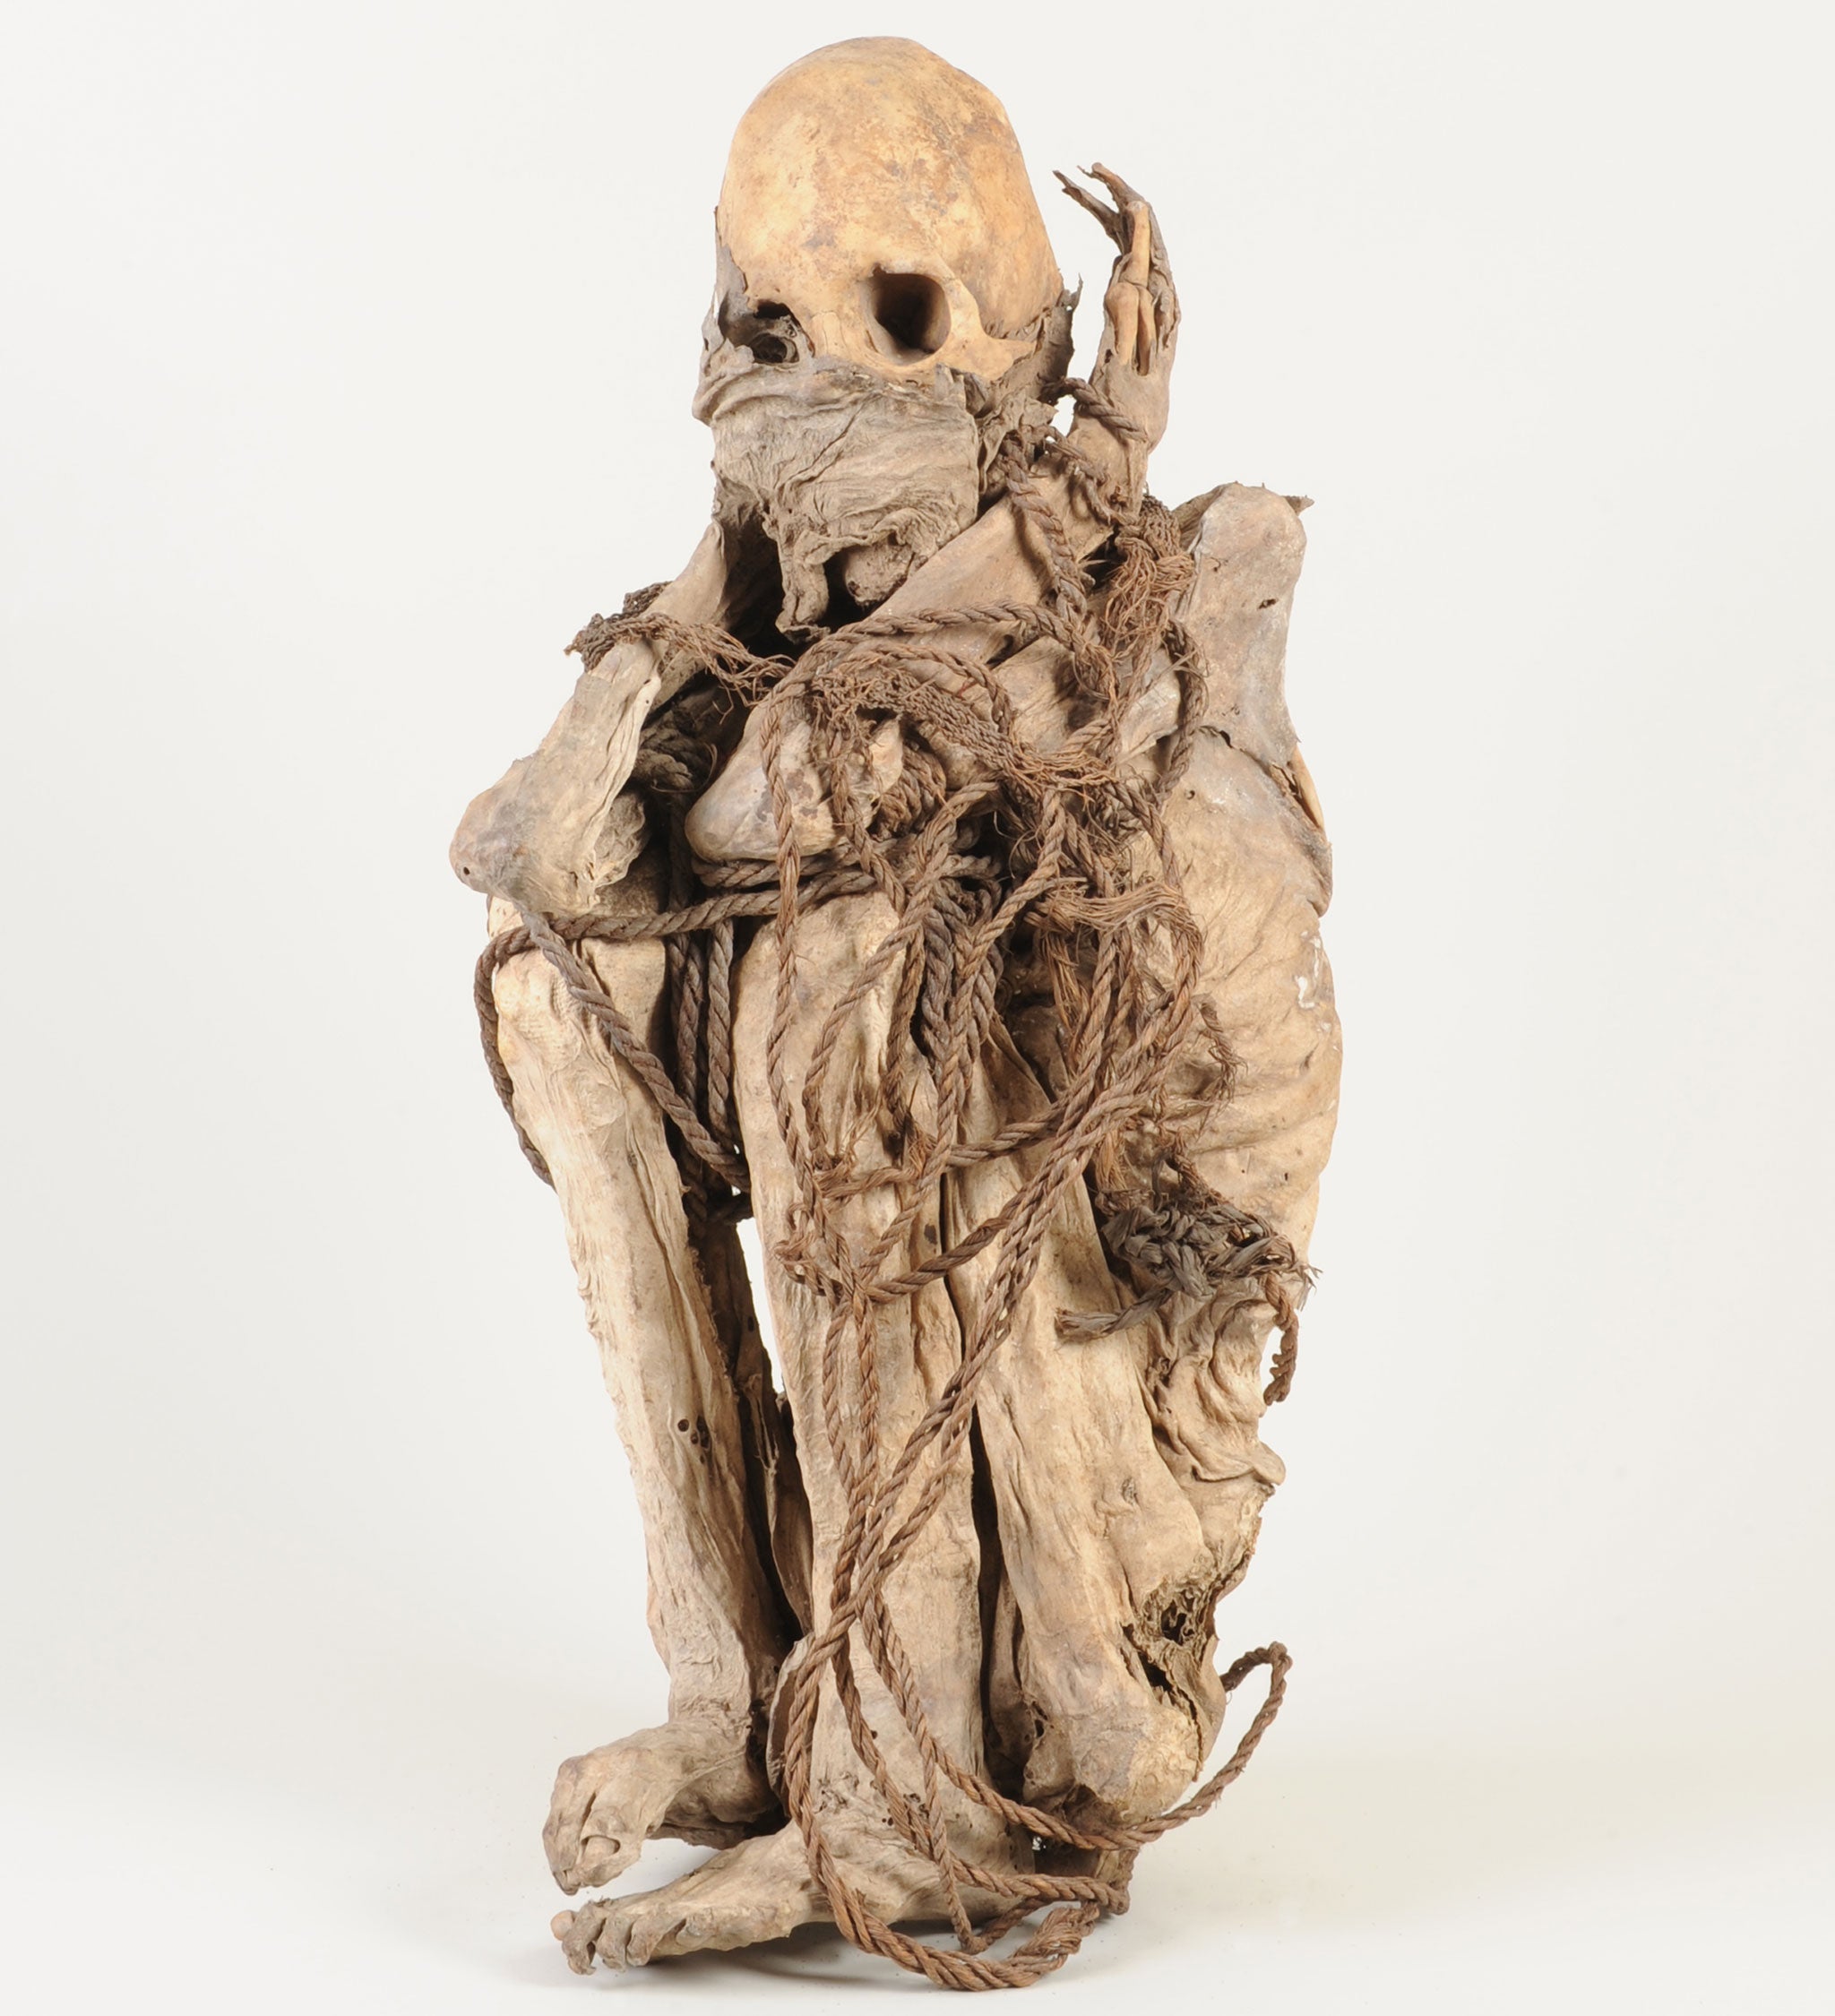 This Peruvian mummy is one of the more diverse exhibits